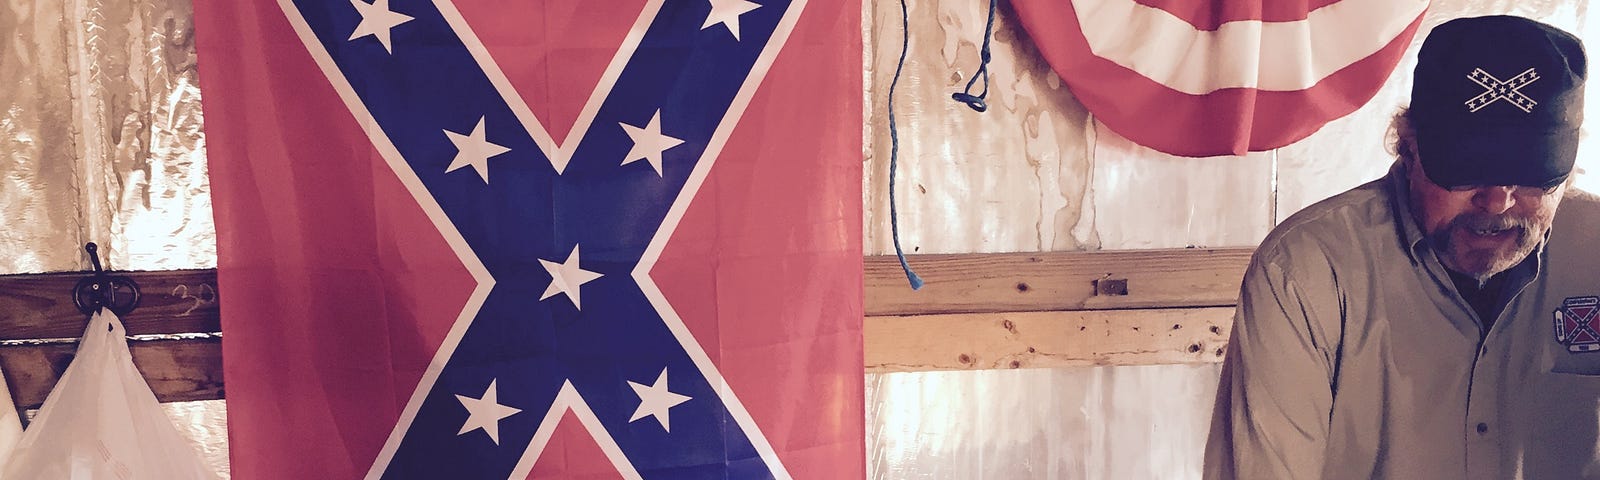 Inside the Sons of Conferacy  stall with a Confederate flag on the wall and a man standing behind a desk